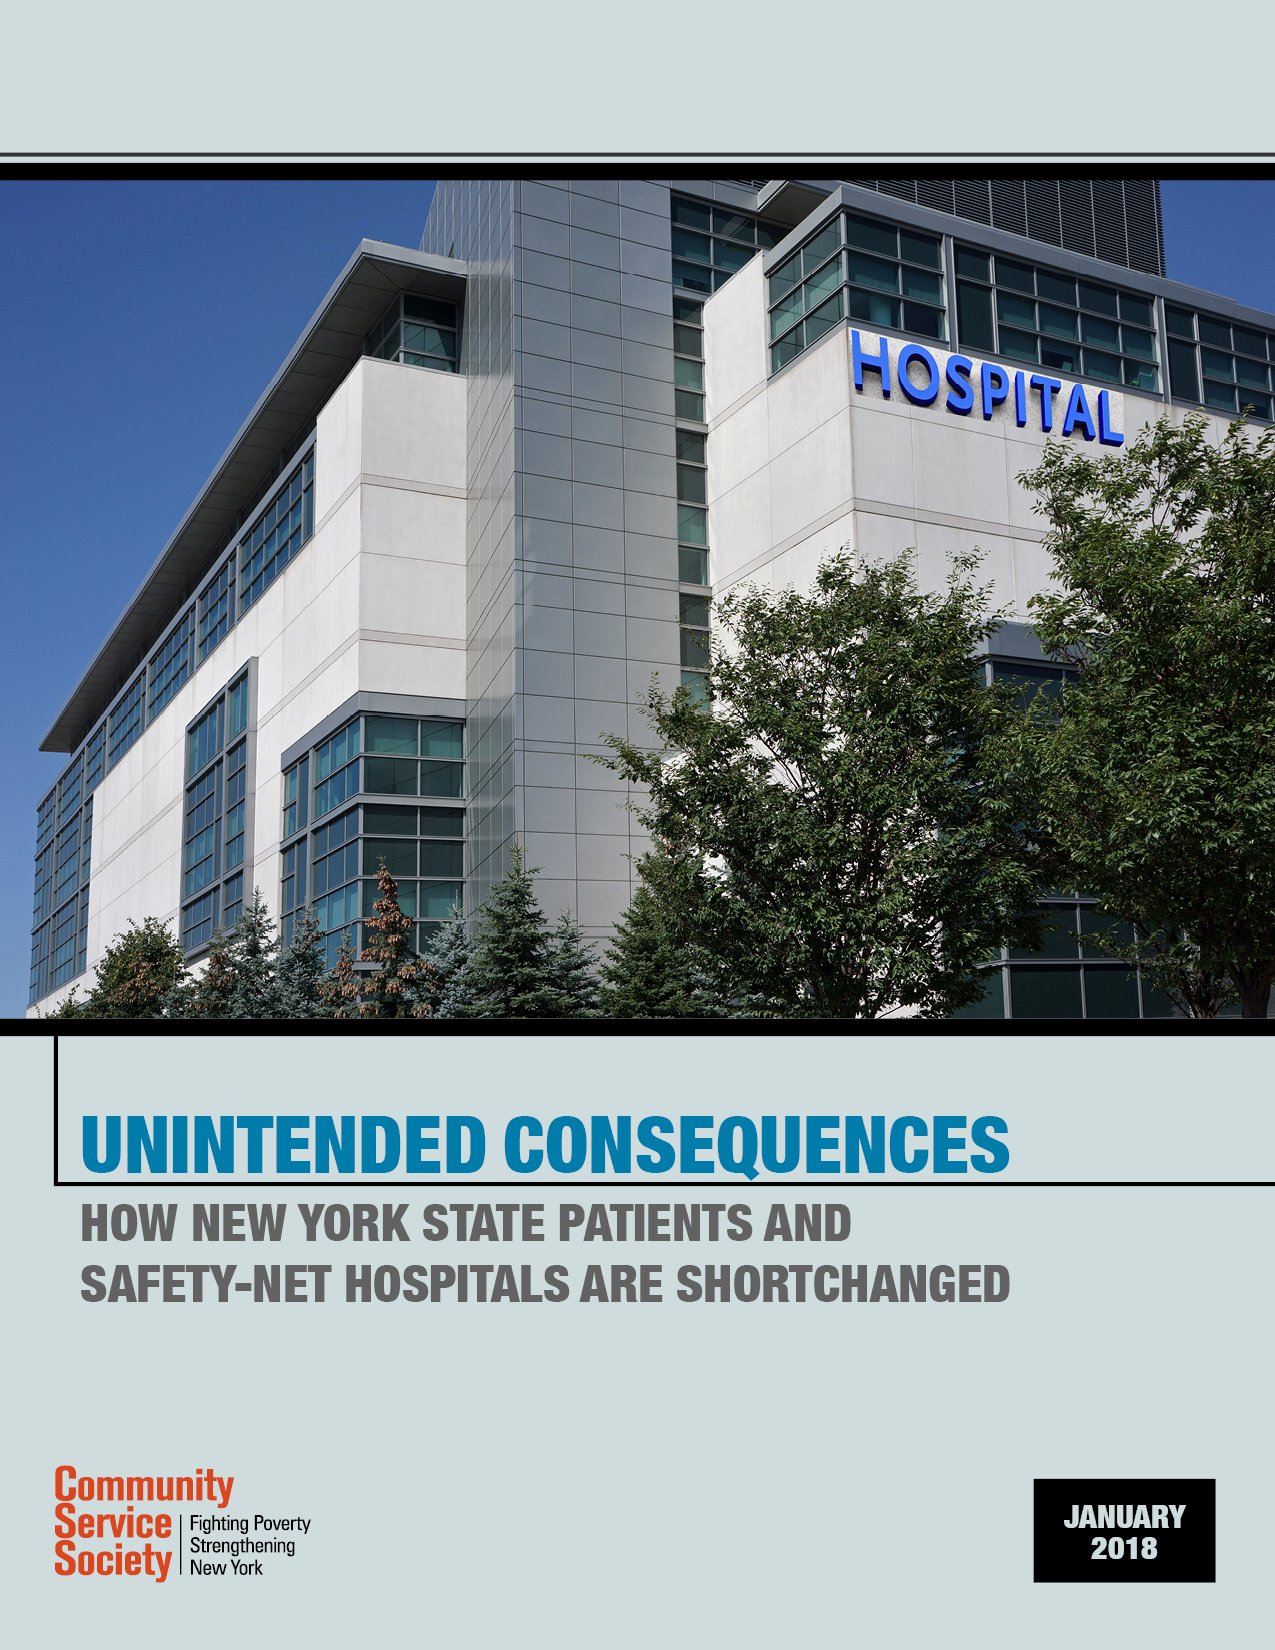 Unintended Consequences - How New York State patients and safety-net hospitals are short changed